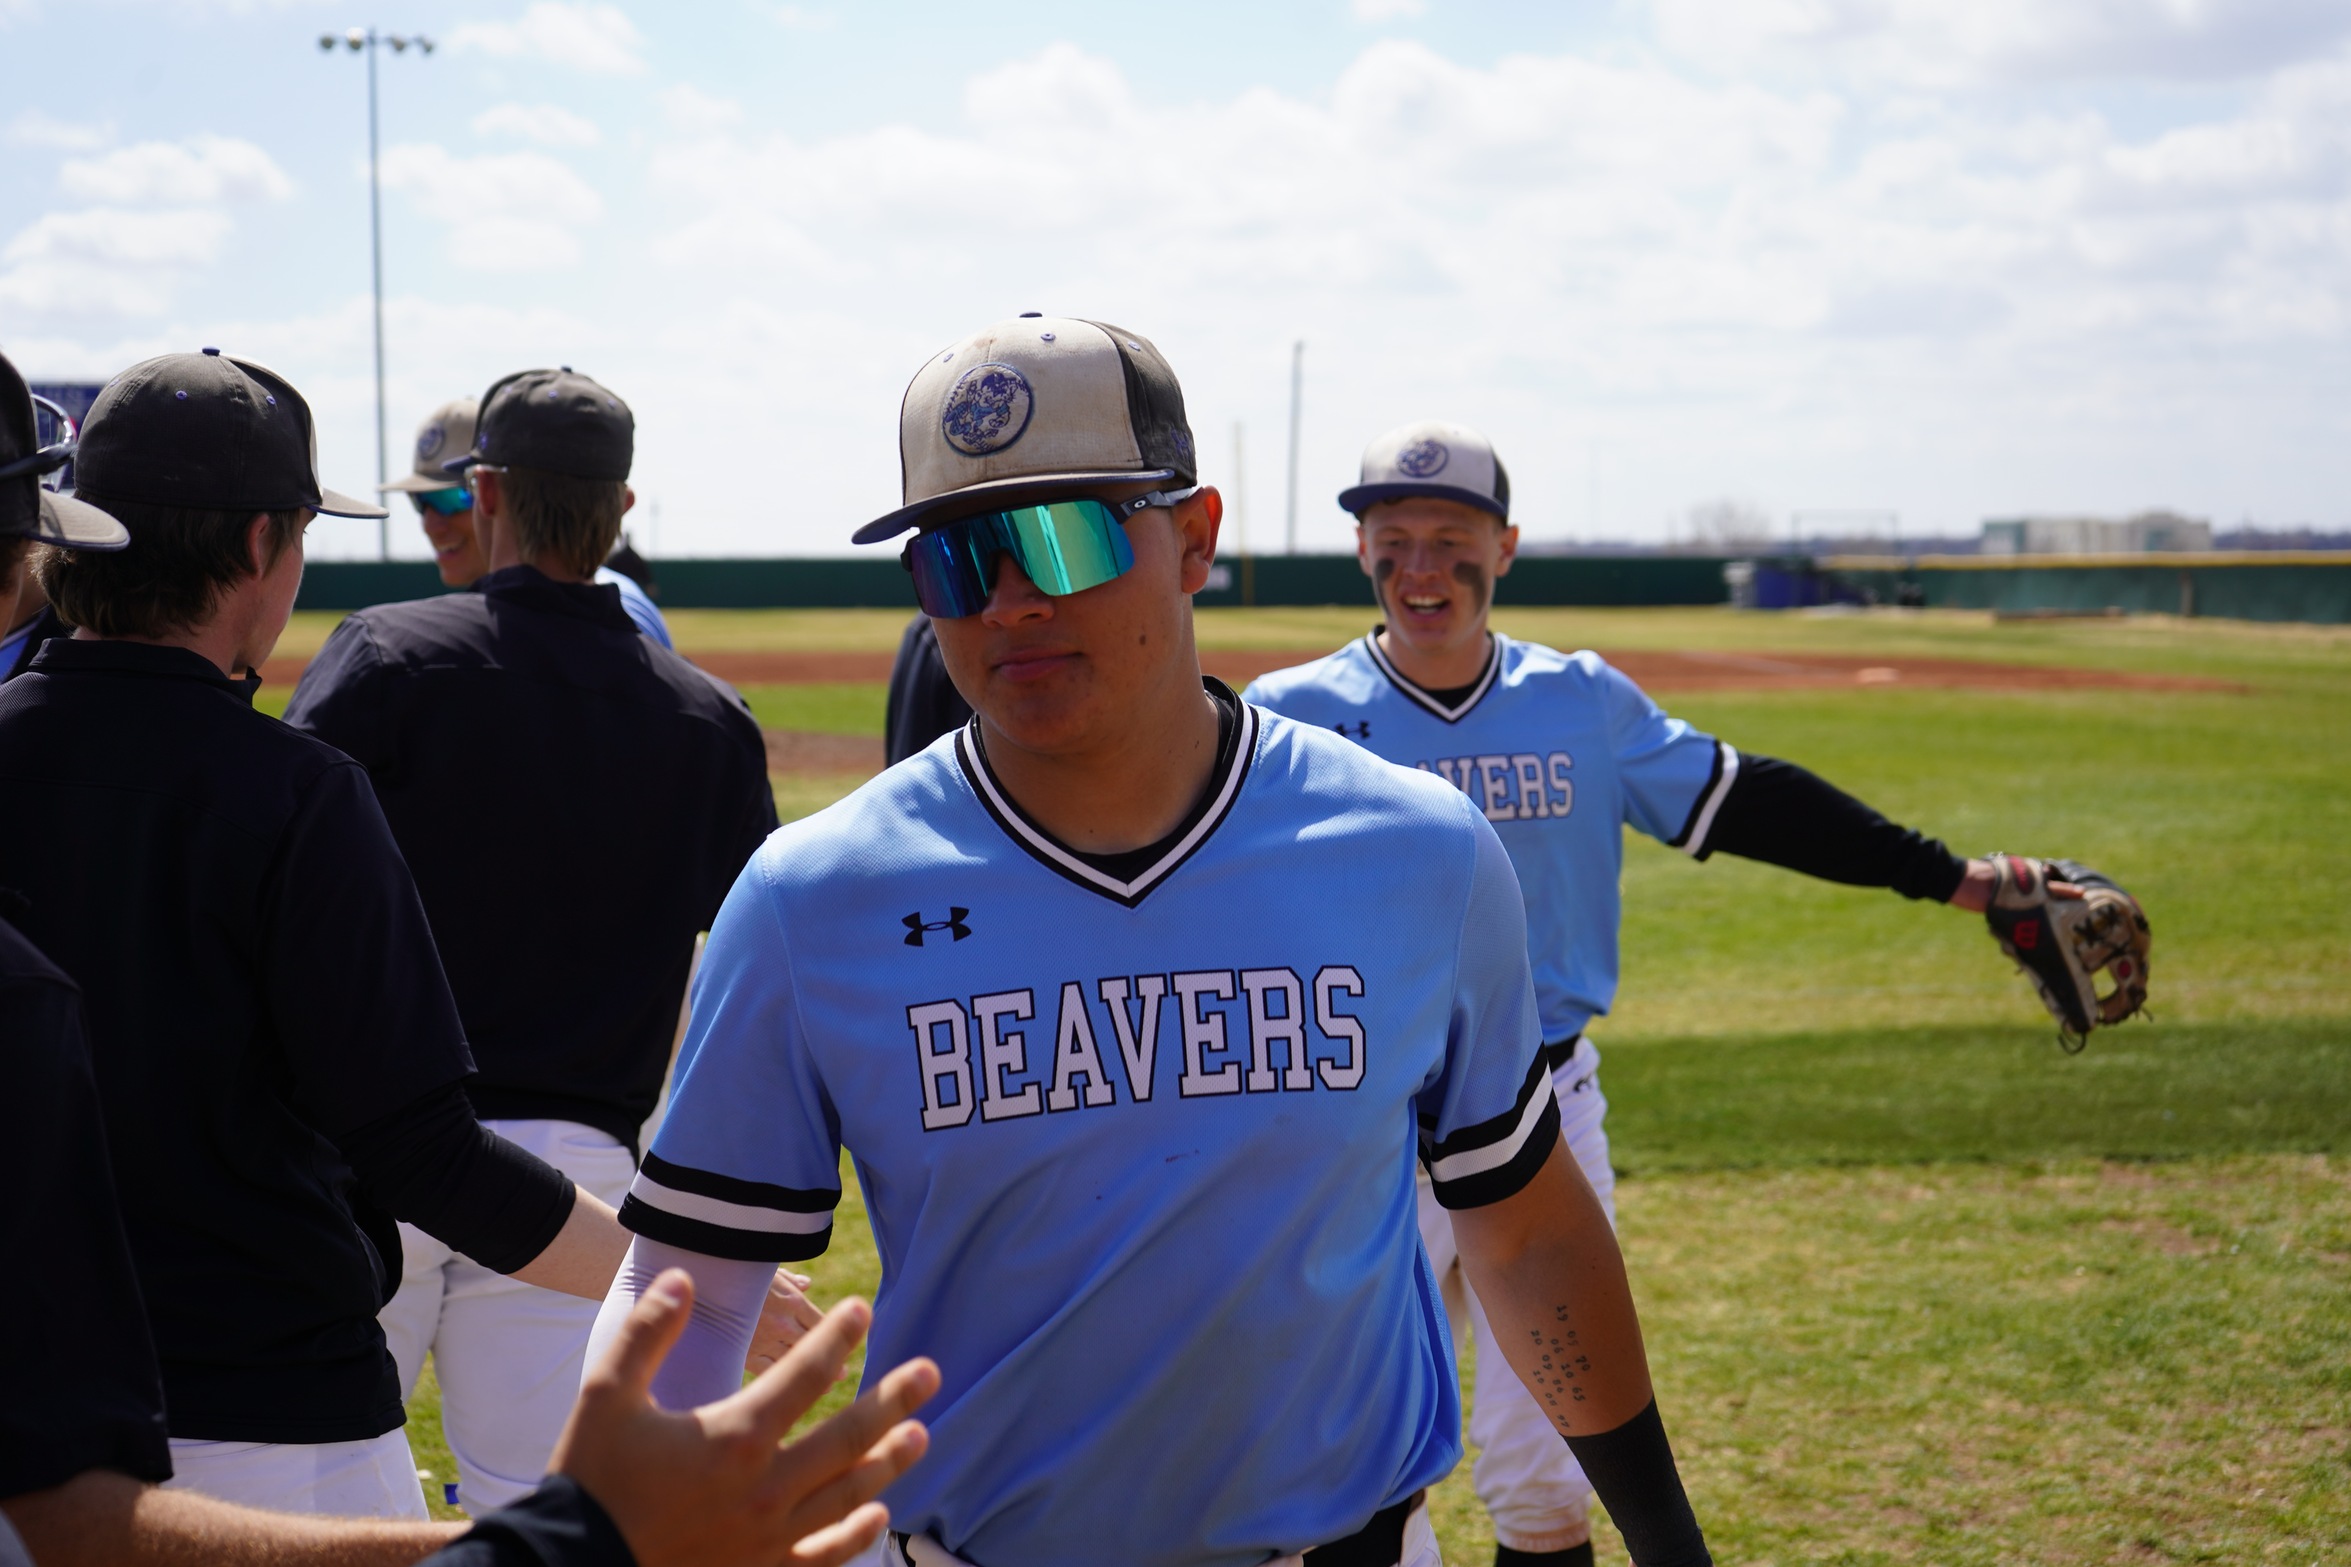 Beavers Complete Four Game Sweep of Garden City